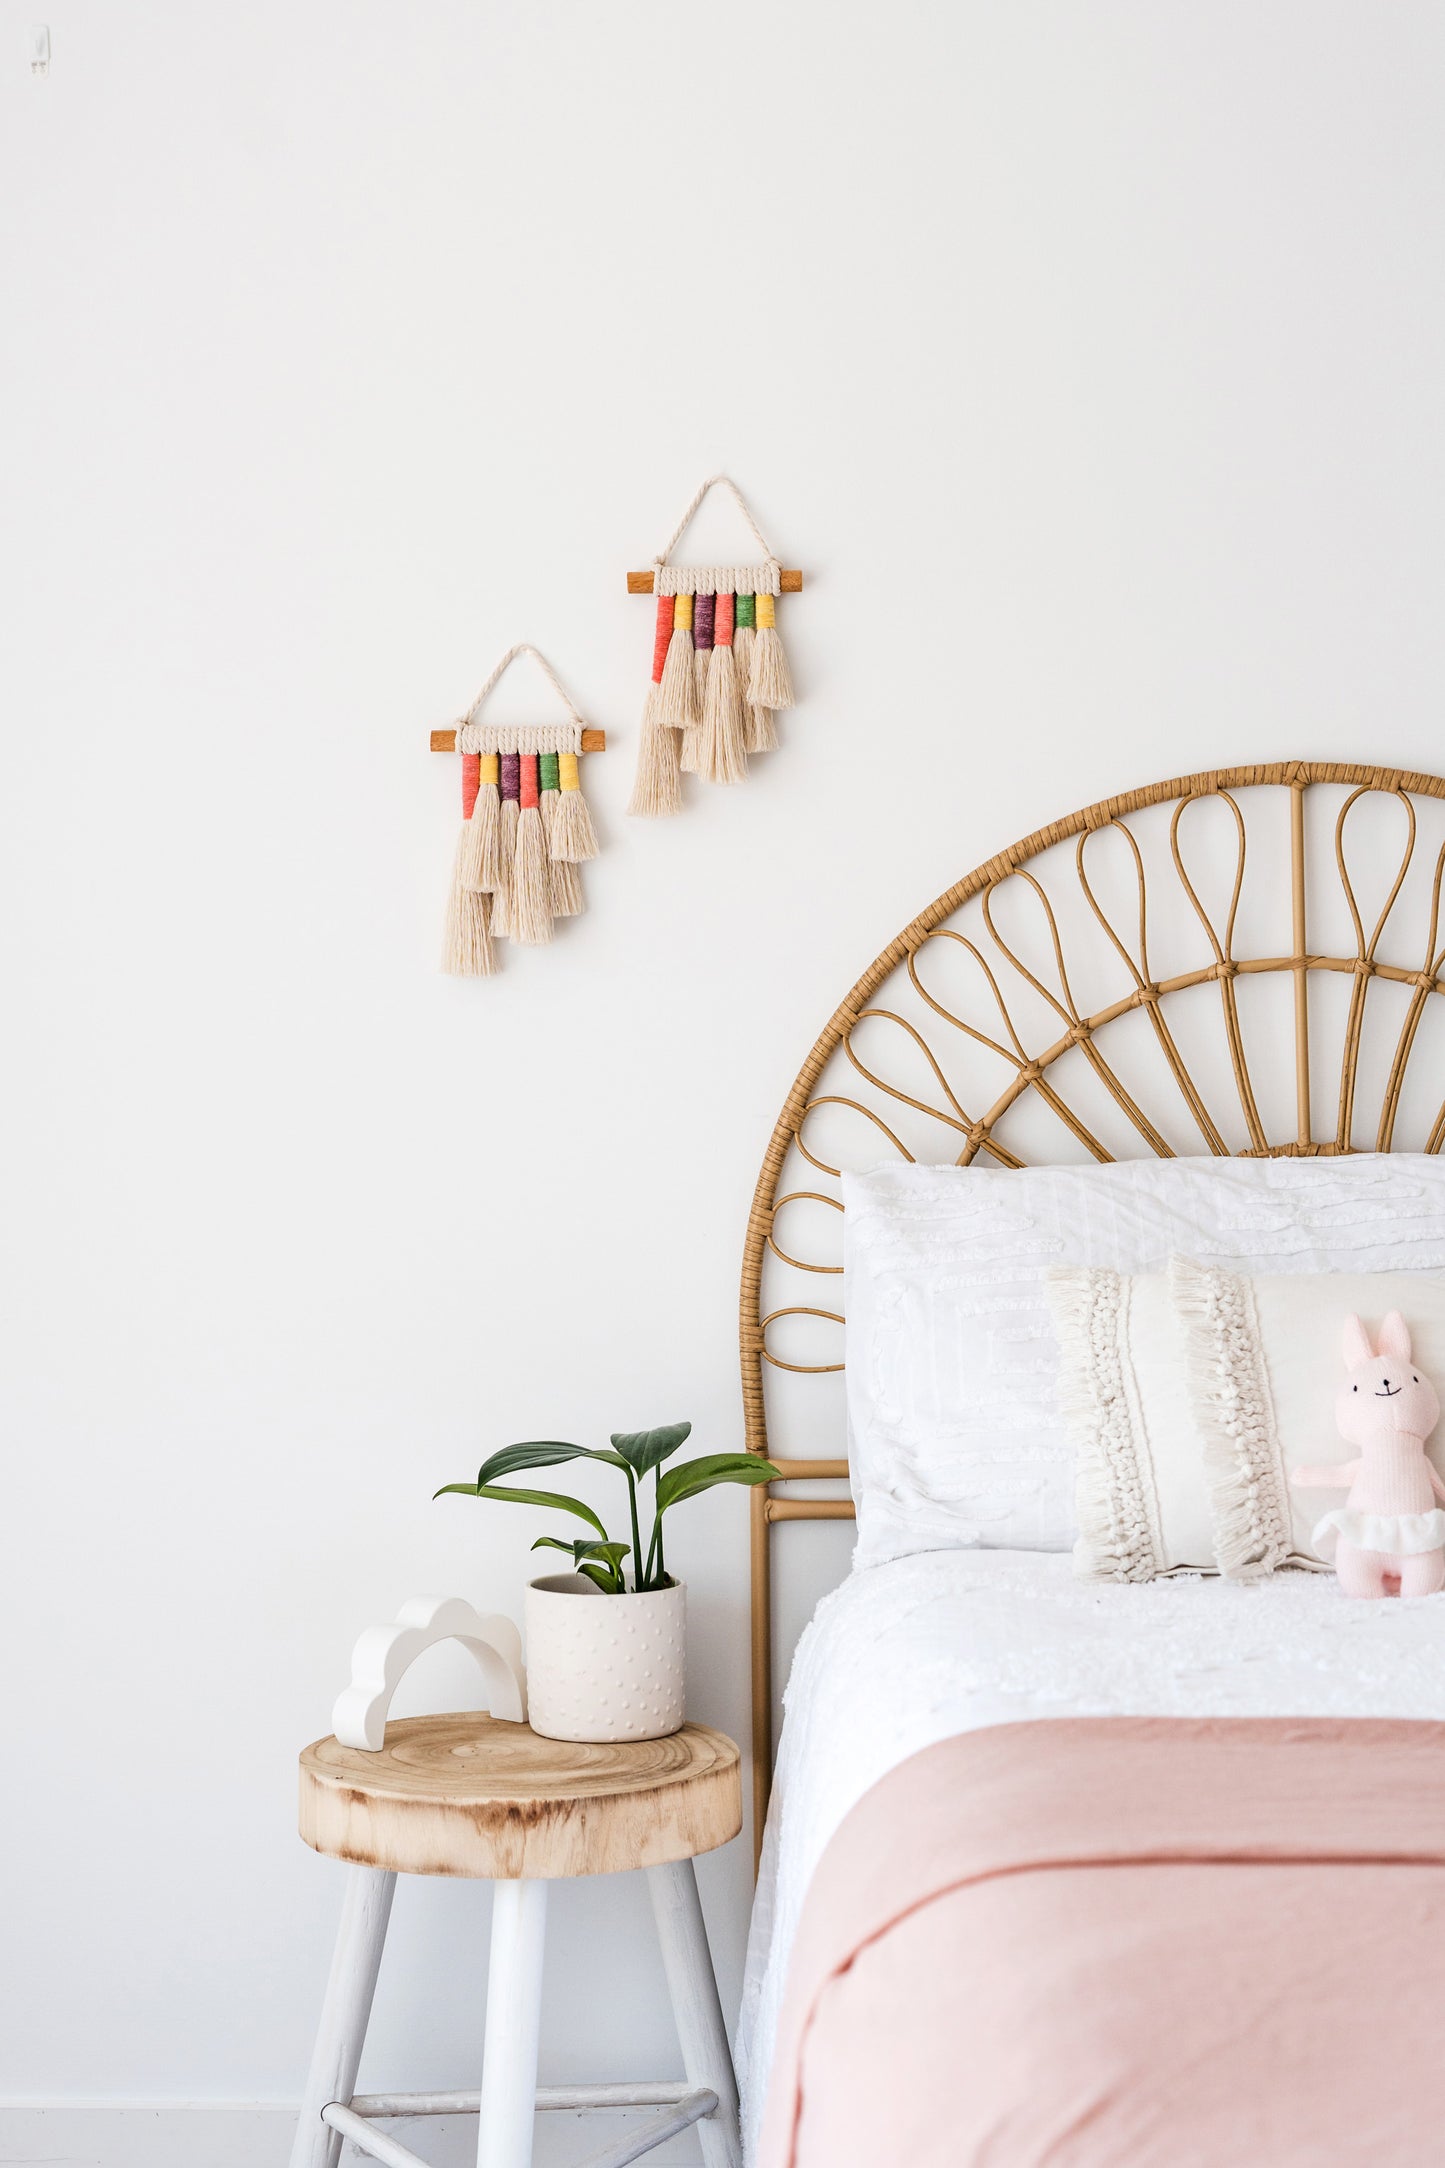 Two small rainbow macrame wall hangings hanged on the wall of a coastal themed kids bedroom.